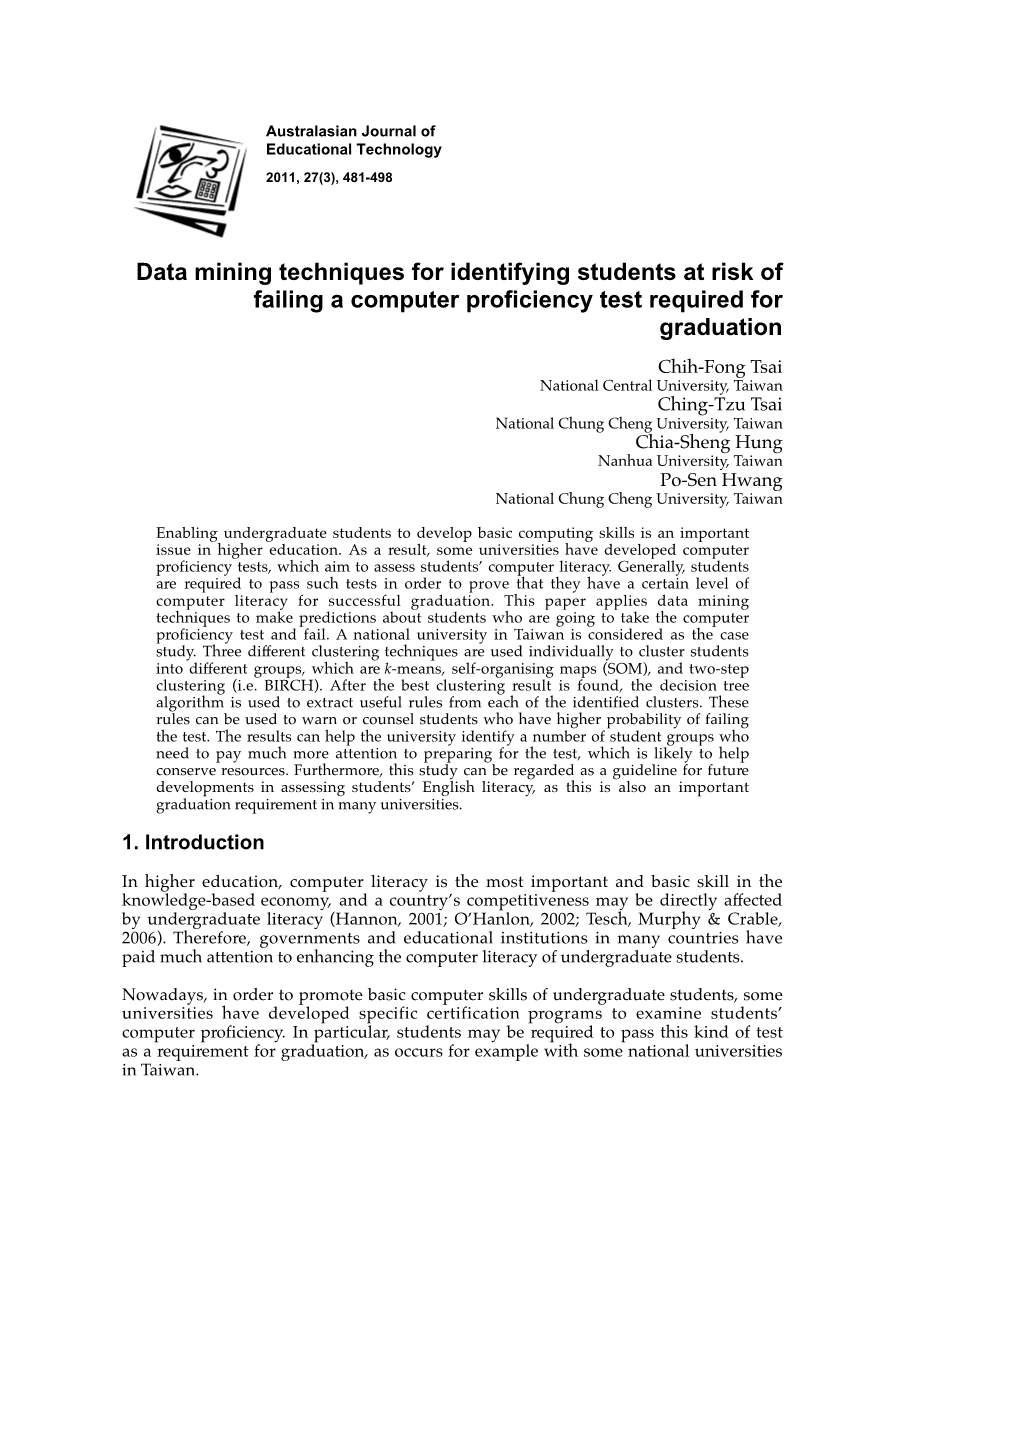 Data Mining Techniques for Identifying Students at Risk of Failing a Computer Proficiency Test Required for Graduation